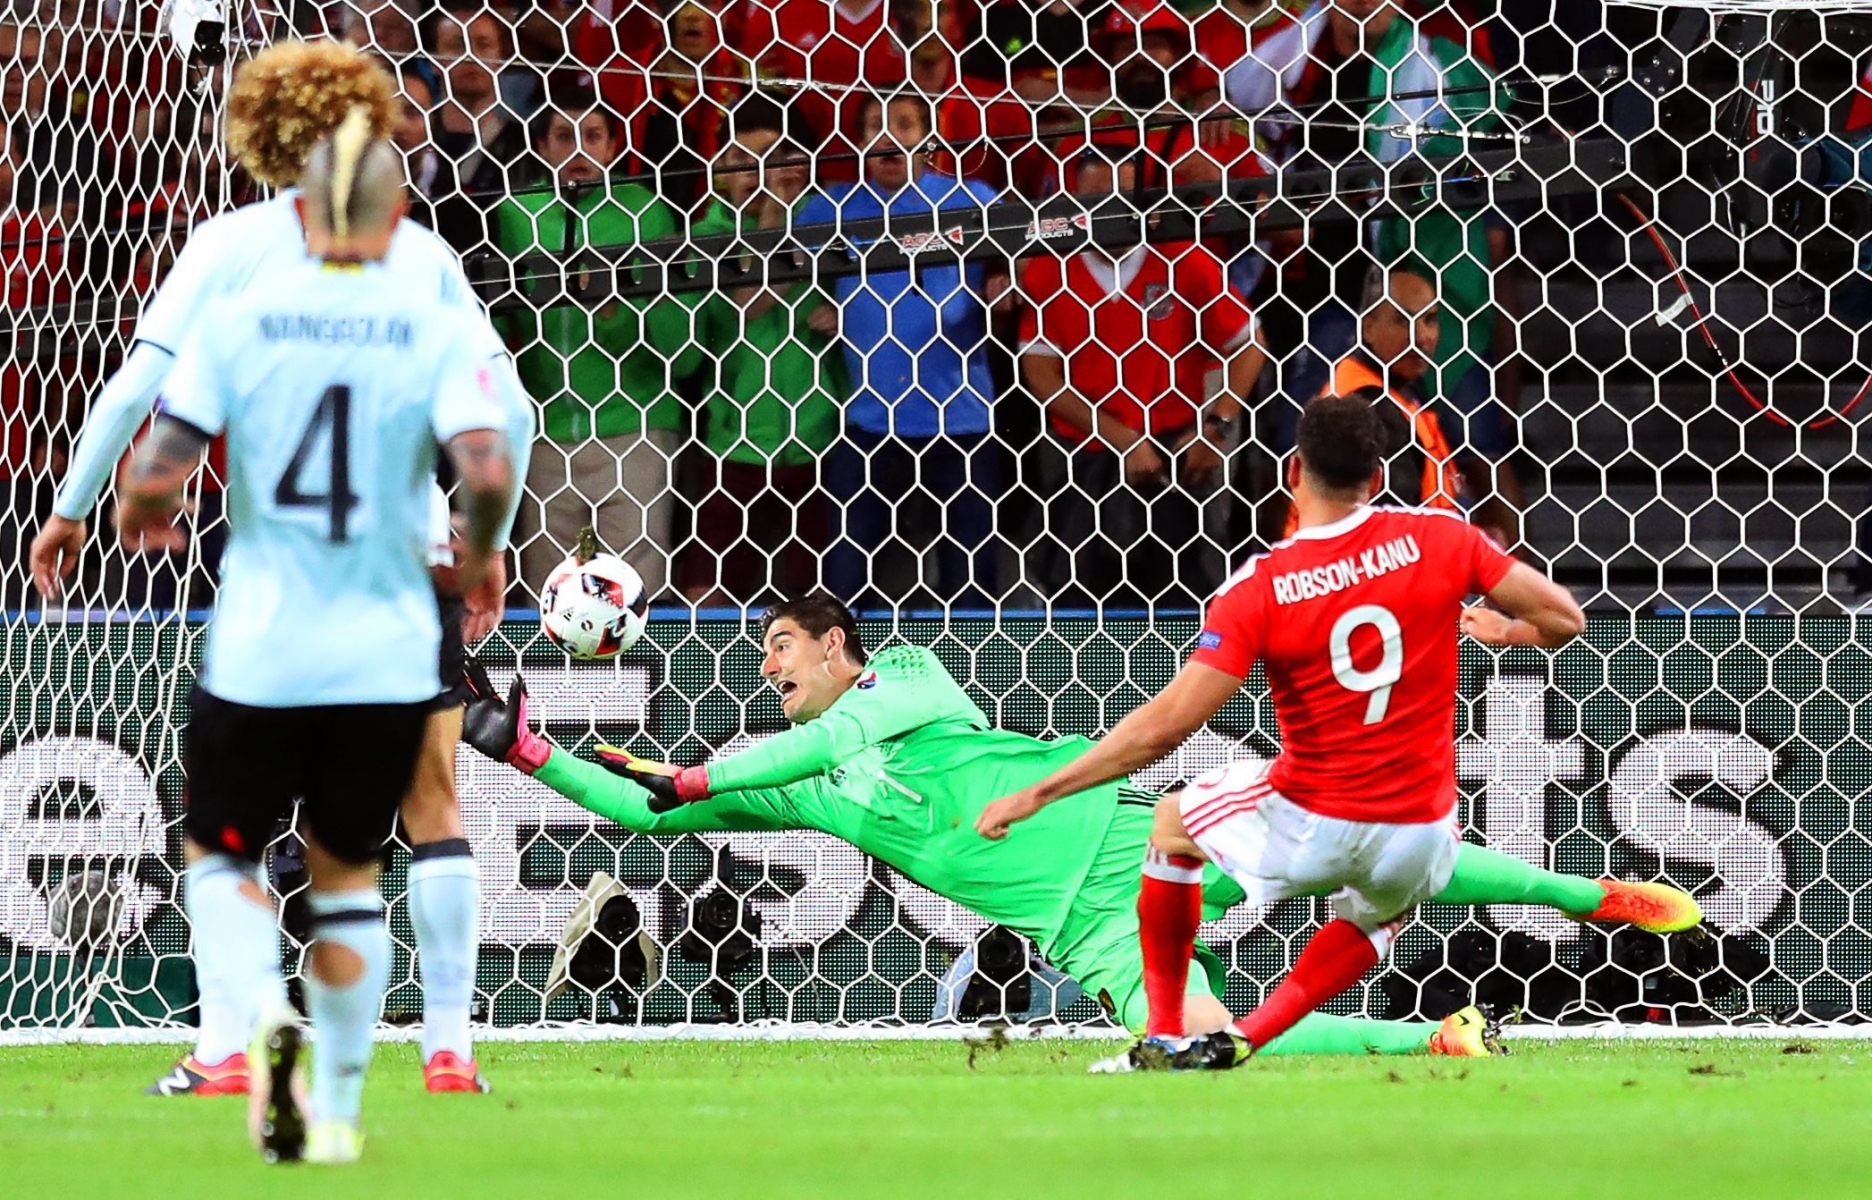 epa05402271 Hal Robson-Kanu (R) of Wales scores the 2-1 lead against Belgium's goalkeeper Thibaut Courtois (C) during the UEFA EURO 2016 quarter final match between Wales and Belgium at Stade Pierre Mauroy in Lille Metropole, France, 01 July 2016.



(RESTRICTIONS APPLY: For editorial news reporting purposes only. Not used for commercial or marketing purposes without prior written approval of UEFA. Images must appear as still images and must not emulate match action video footage. Photographs published in online publications (whether via the Internet or otherwise) shall have an interval of at least 20 seconds between the posting.)  EPA/LAURENT DUBRULE   EDITORIAL USE ONLY FRANCE SOCCER UEFA EURO 2016